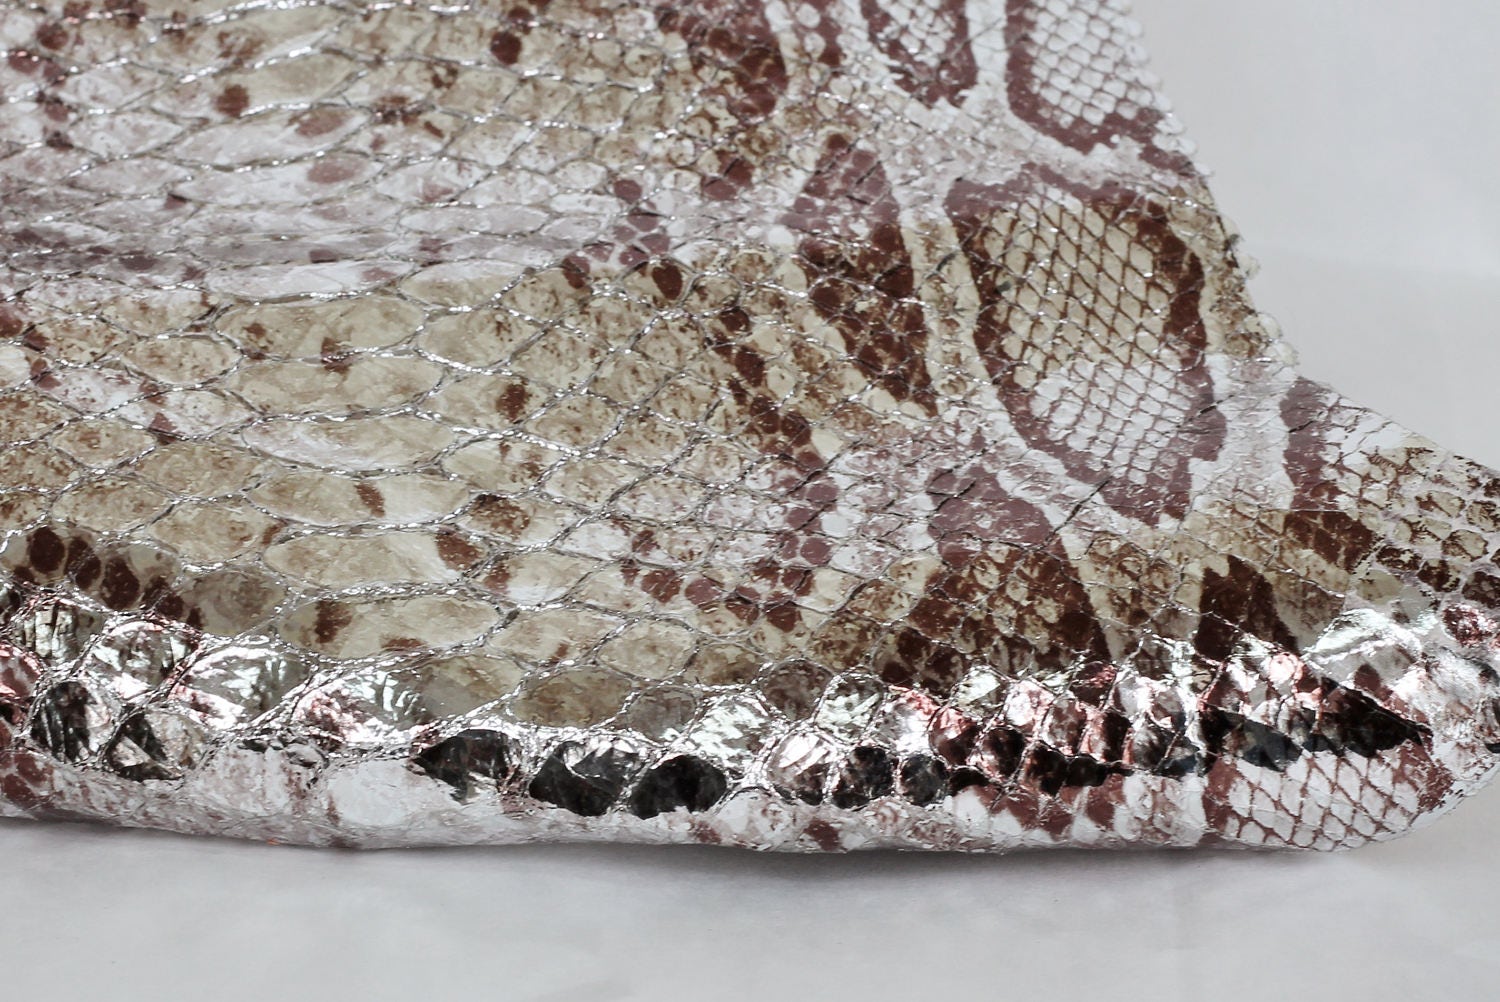 New Snakeskin Print Genuine Leather, Metallic Silver and Brown Goat ...